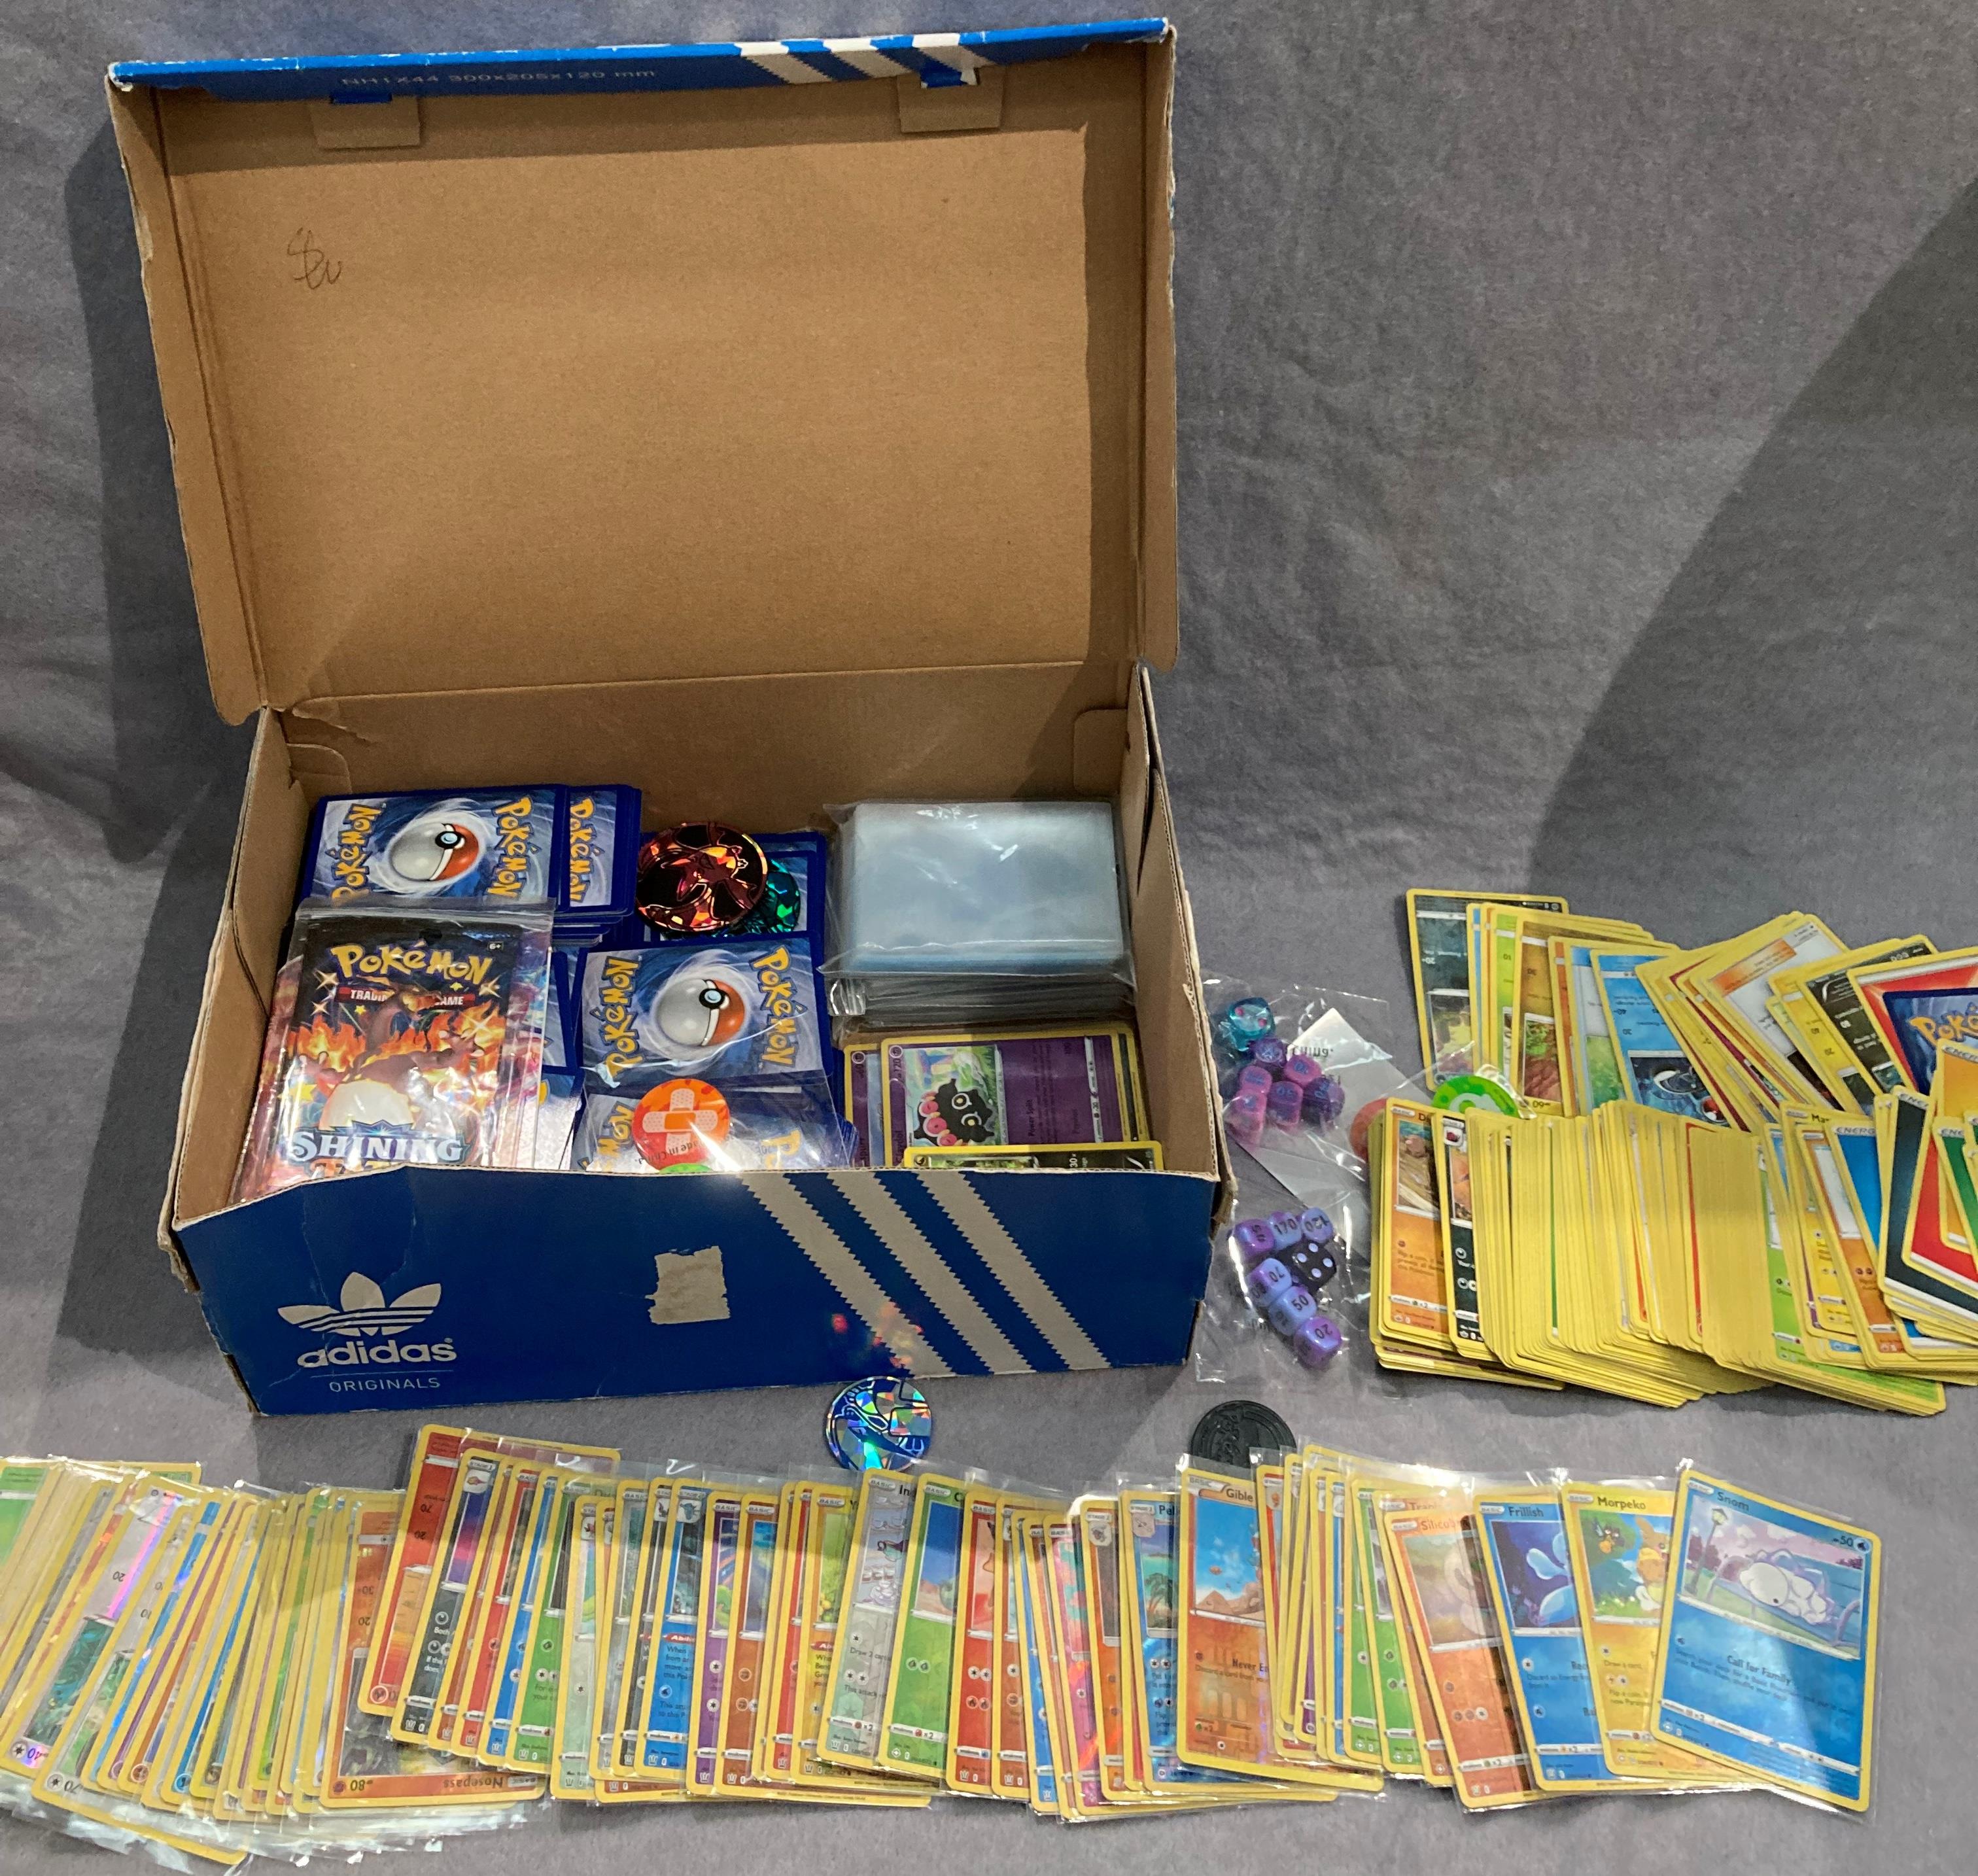 Contents to box - approximately one thousand two hundred and seventy-five Pokémon trading cards